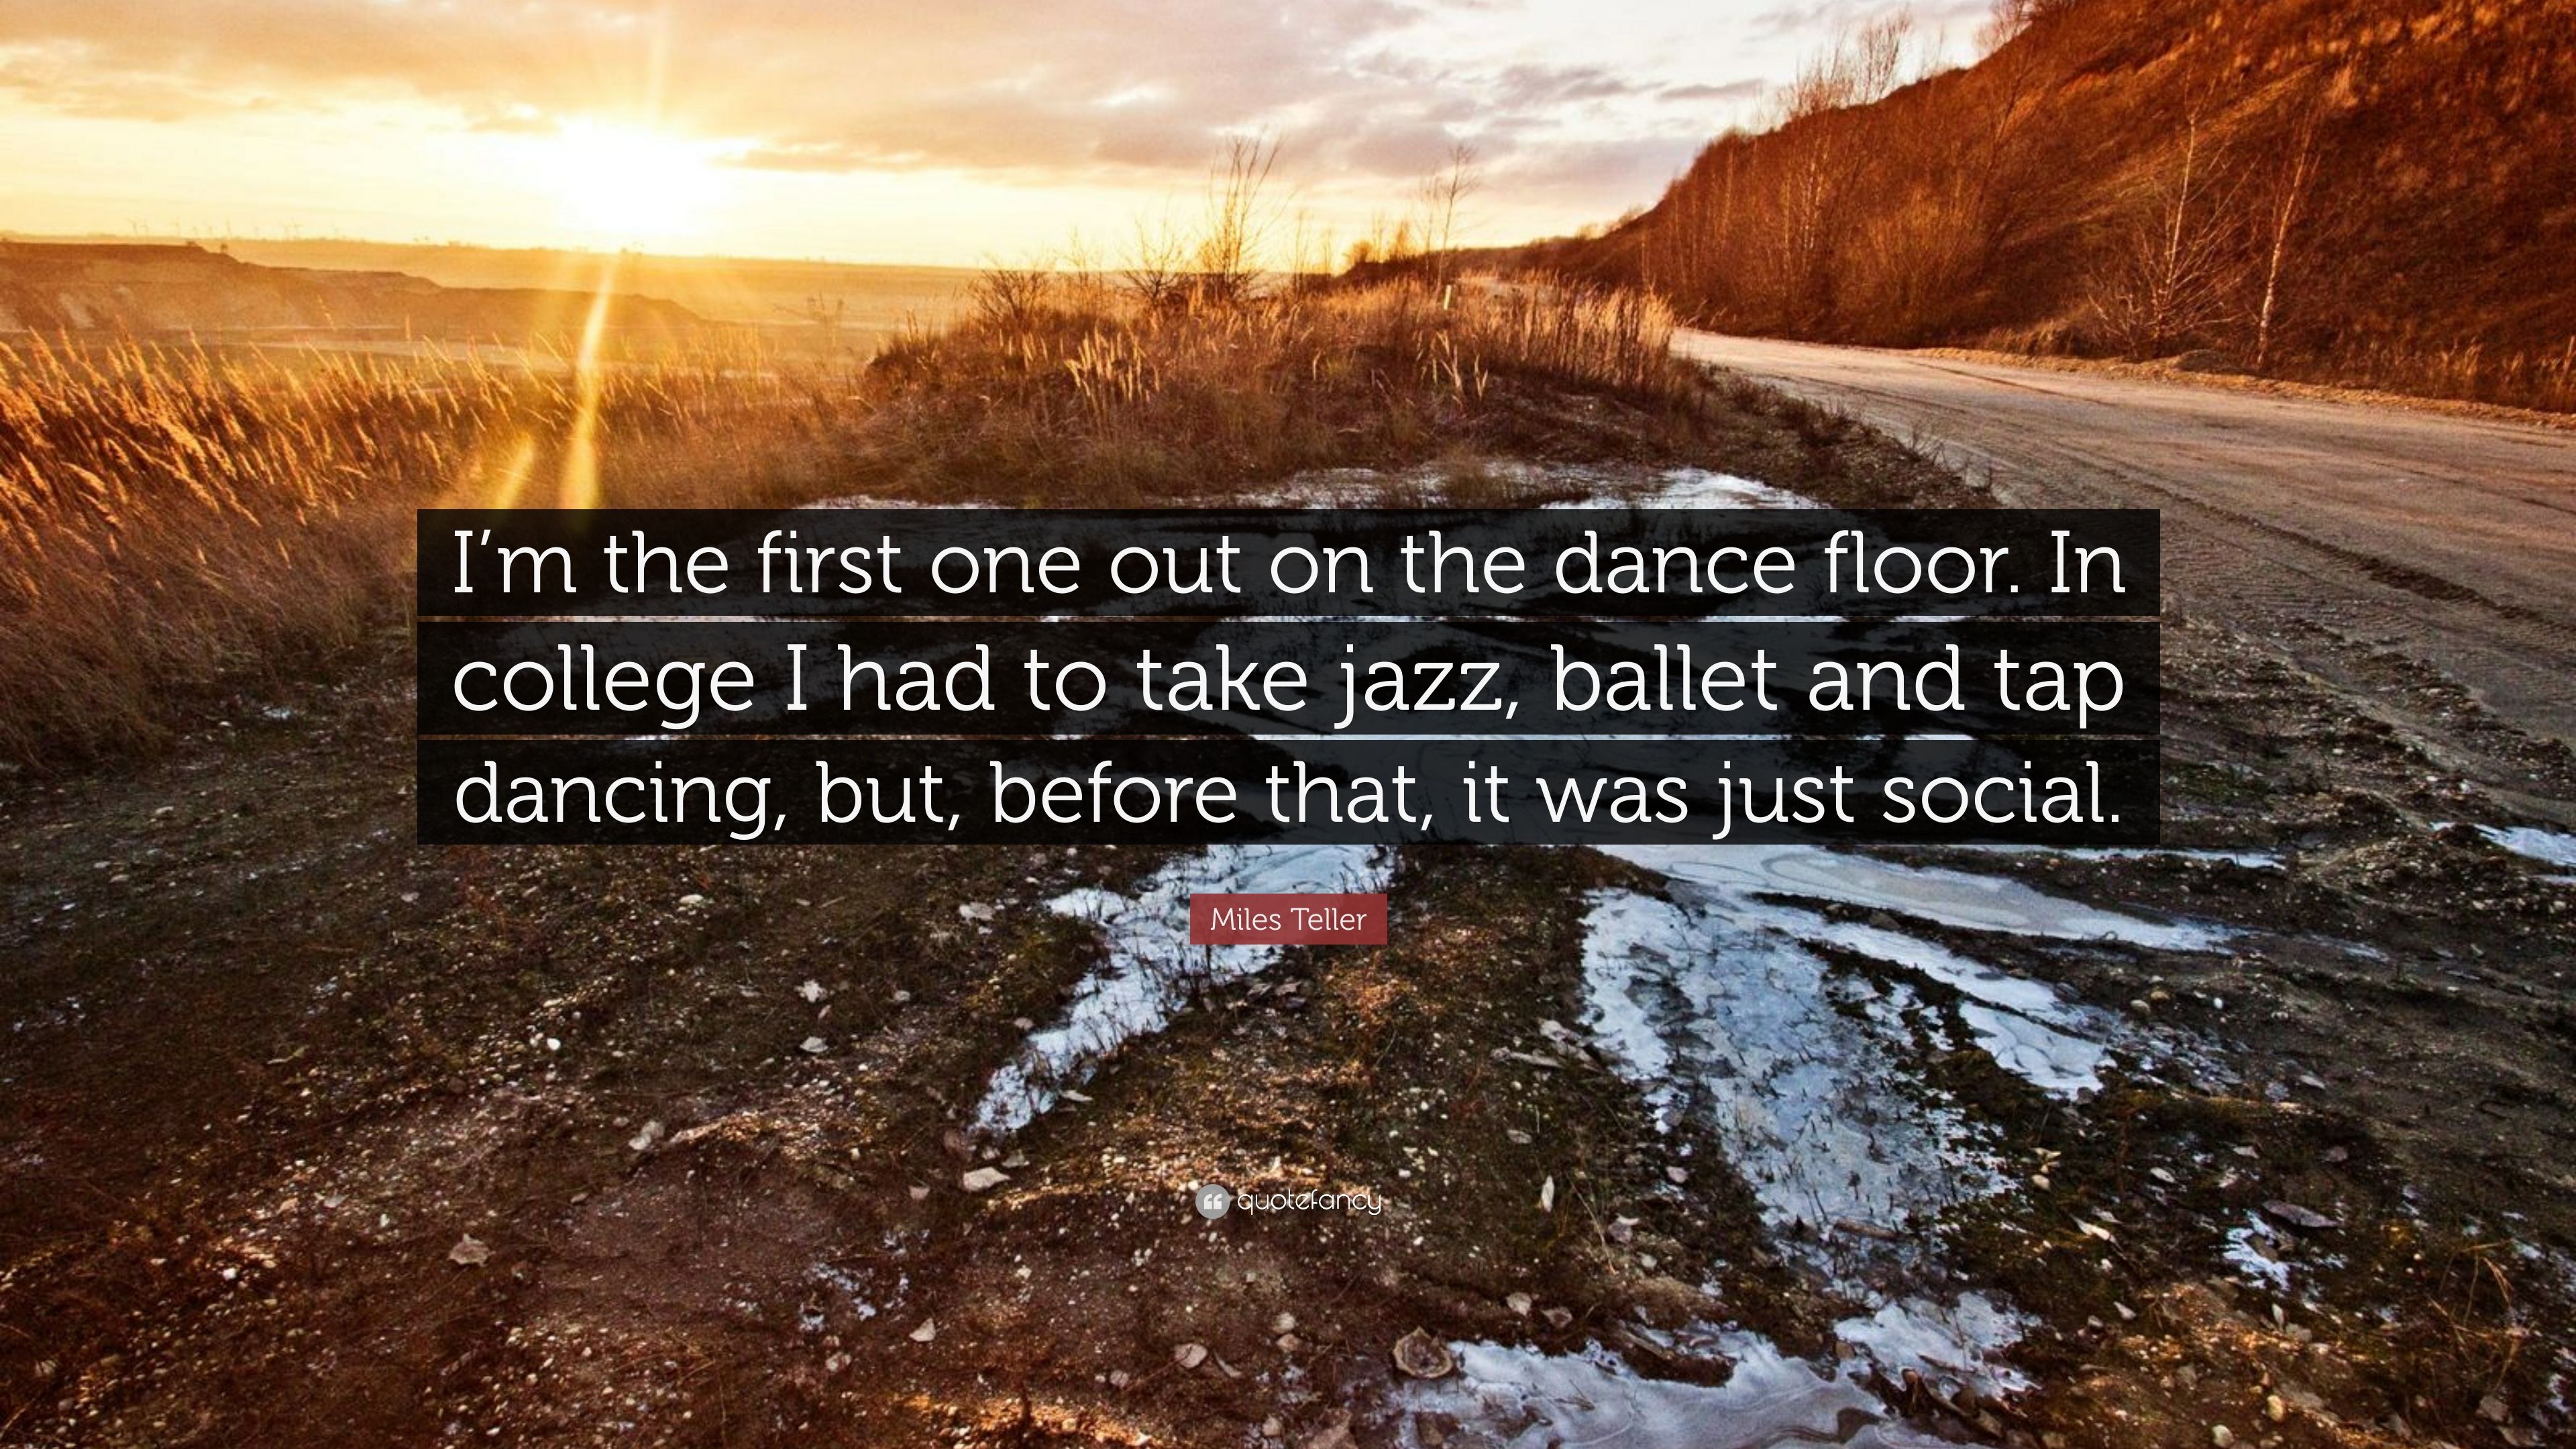 Miles Teller Quote: “I'm the first one out on the dance floor